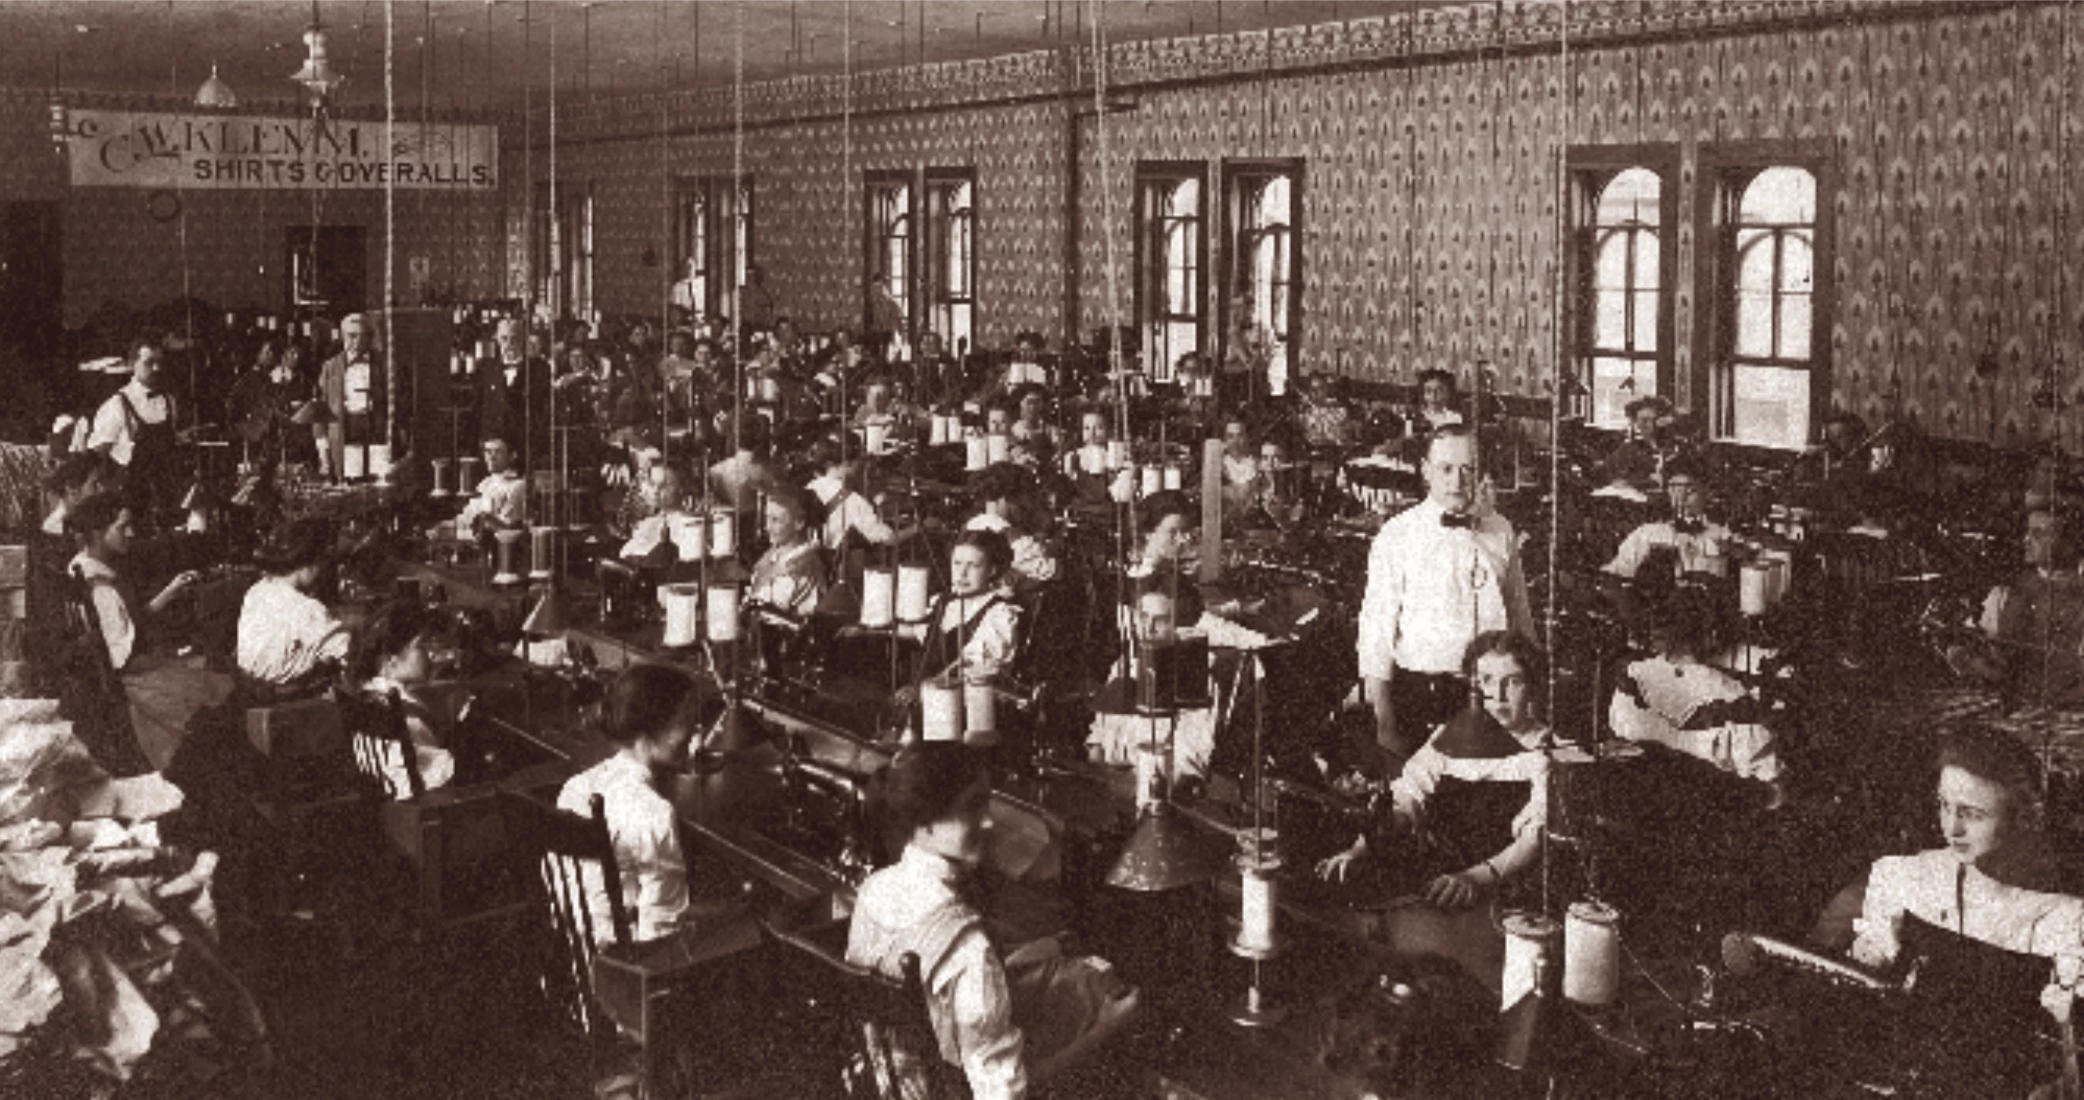 interior factory photograph showing women at sowing machines and a man standing in the middle.